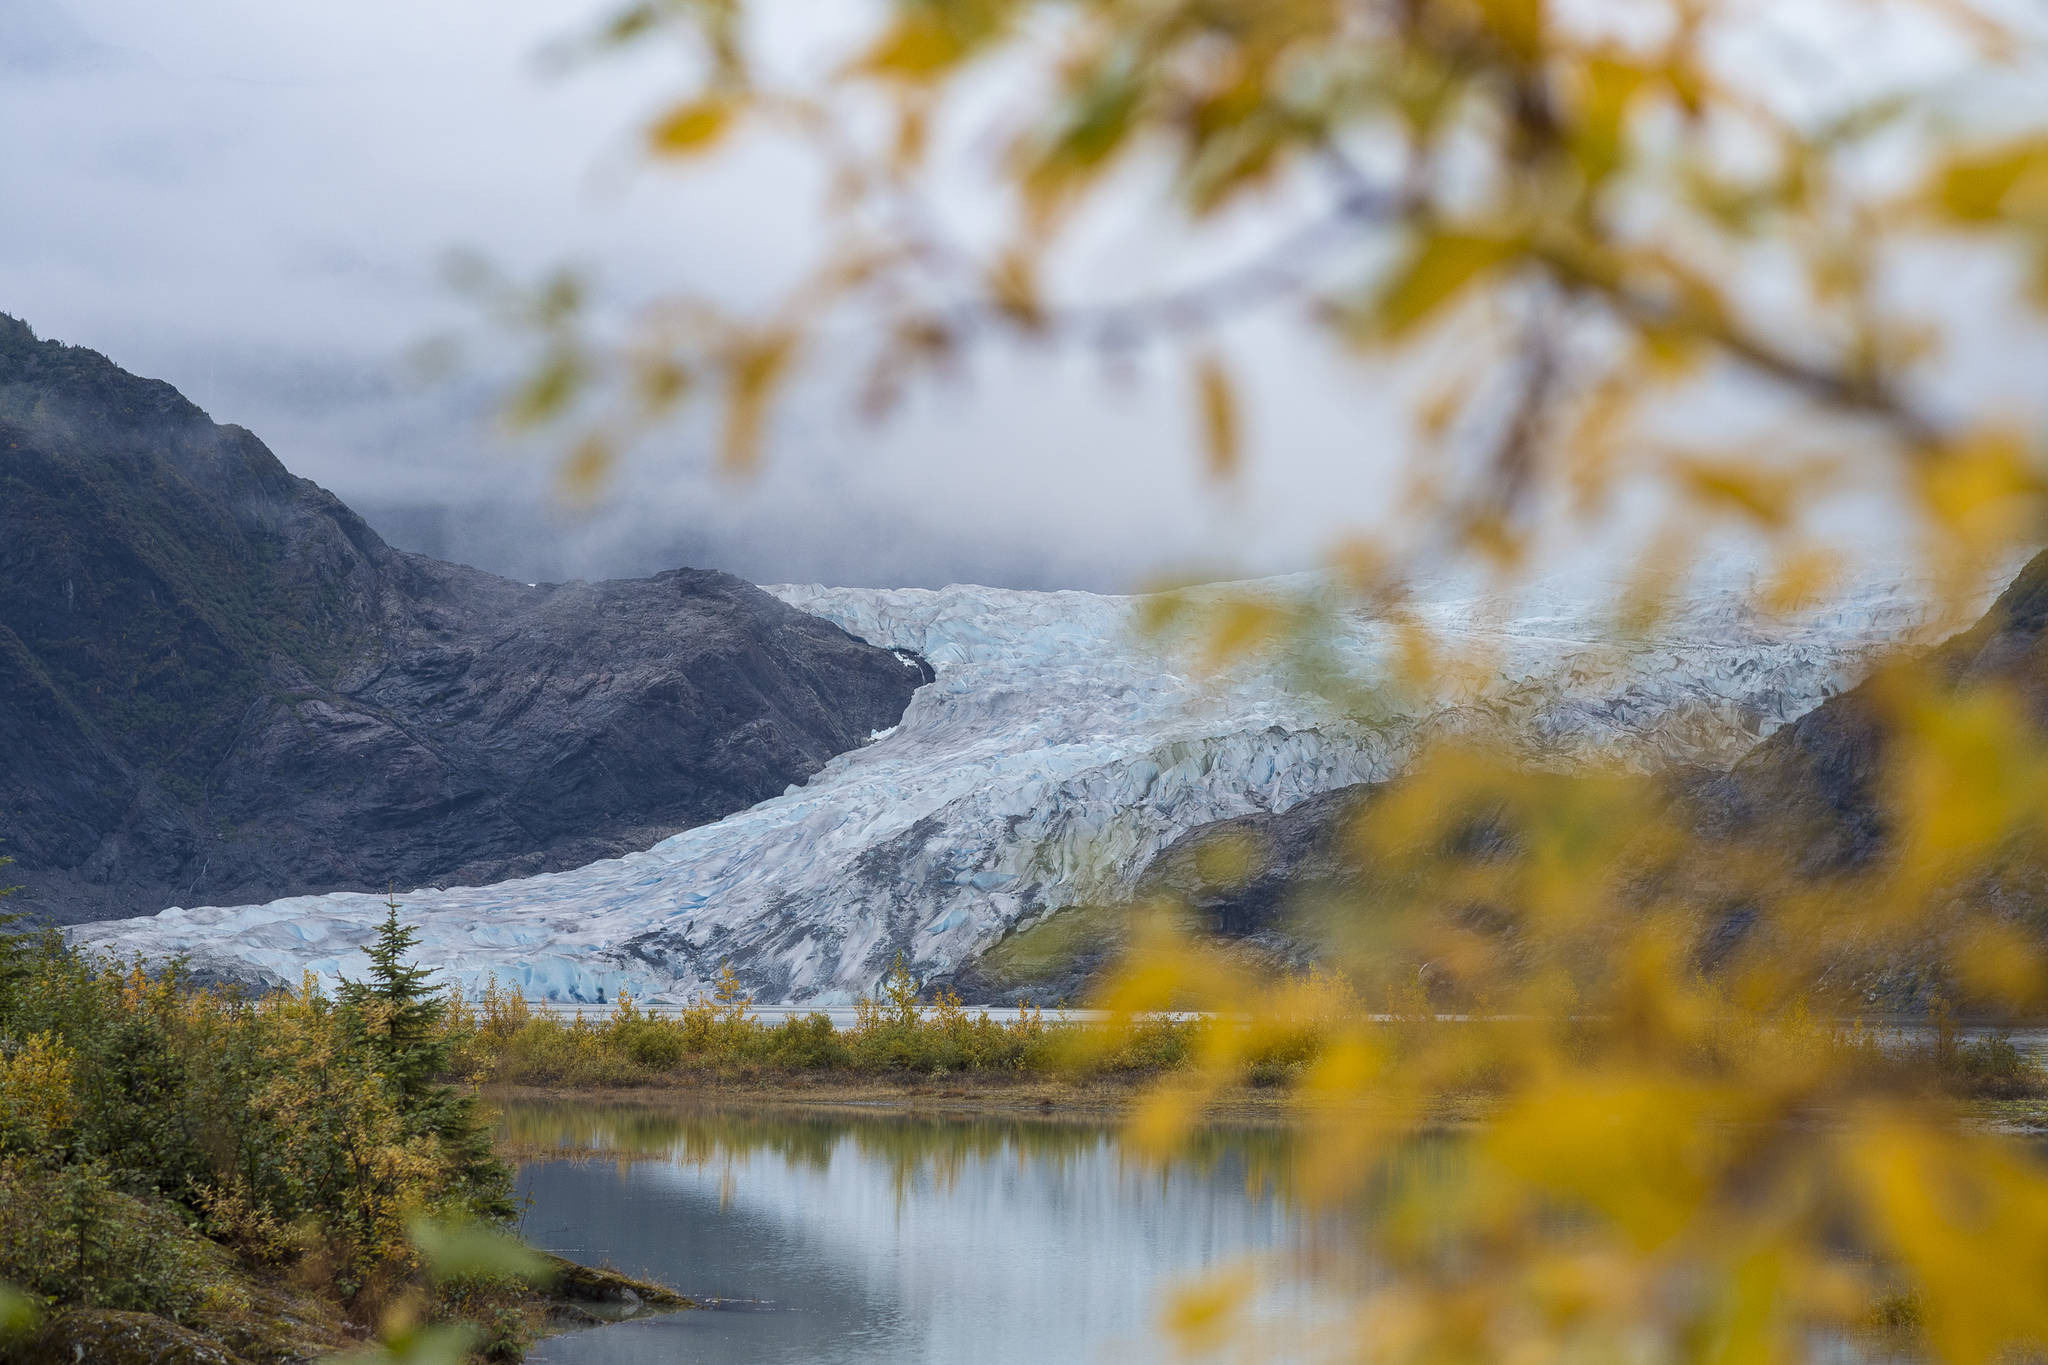 Fall colors are coming to the foliage at the Mendenhall Glacier Visitor Center on Wednesday, Sept. 26, 2018. (Michael Penn | Juneau Empire)